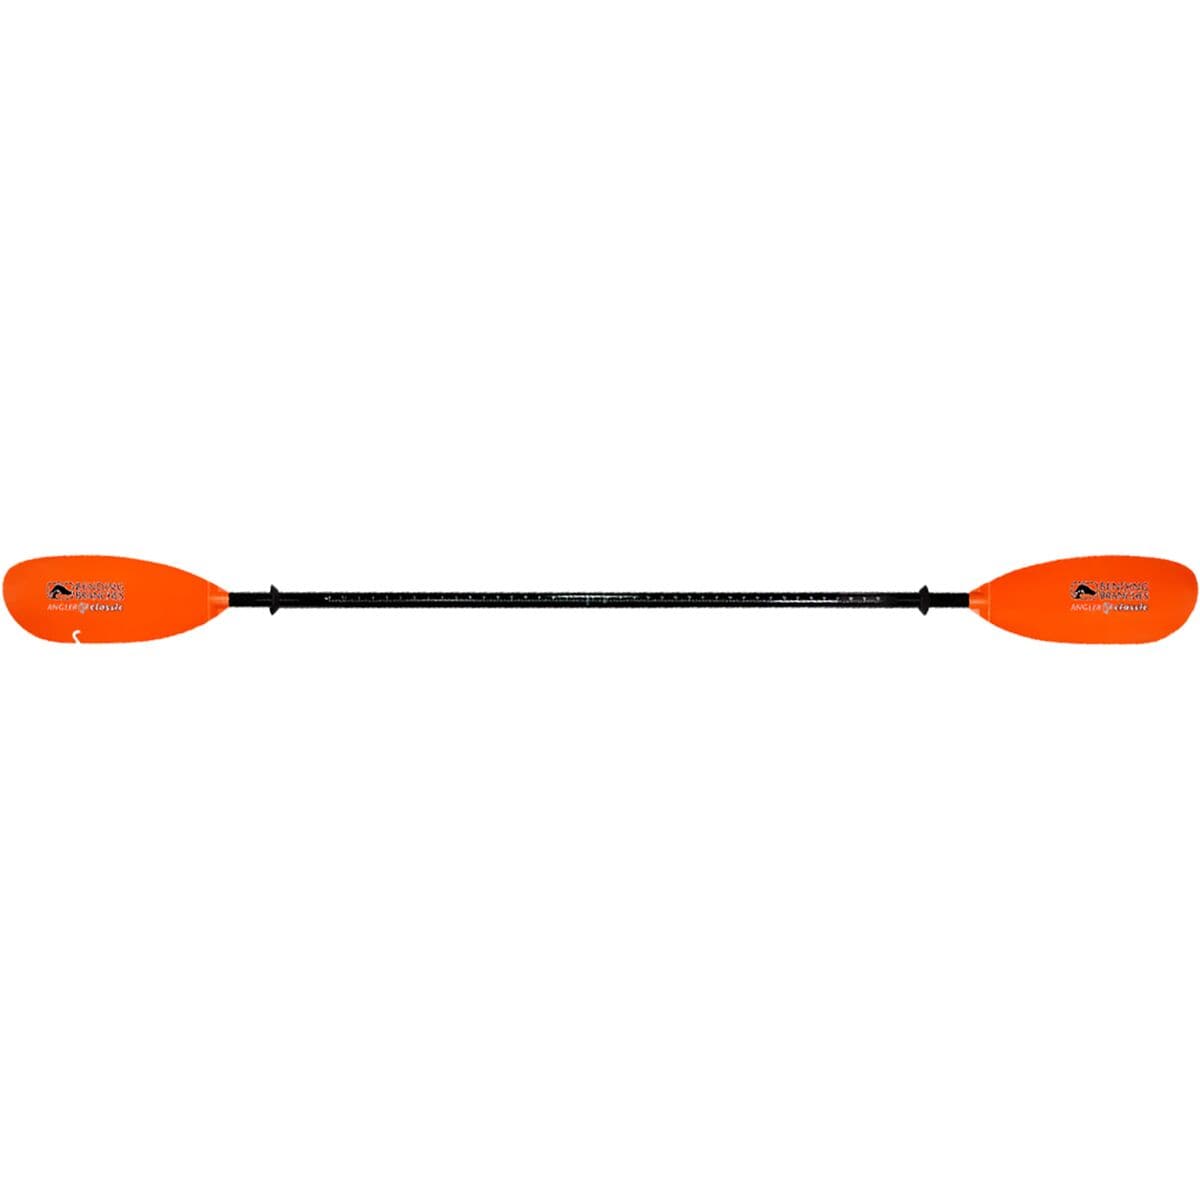 Bending Branches Classic Angler Paddle - Straight Shaft